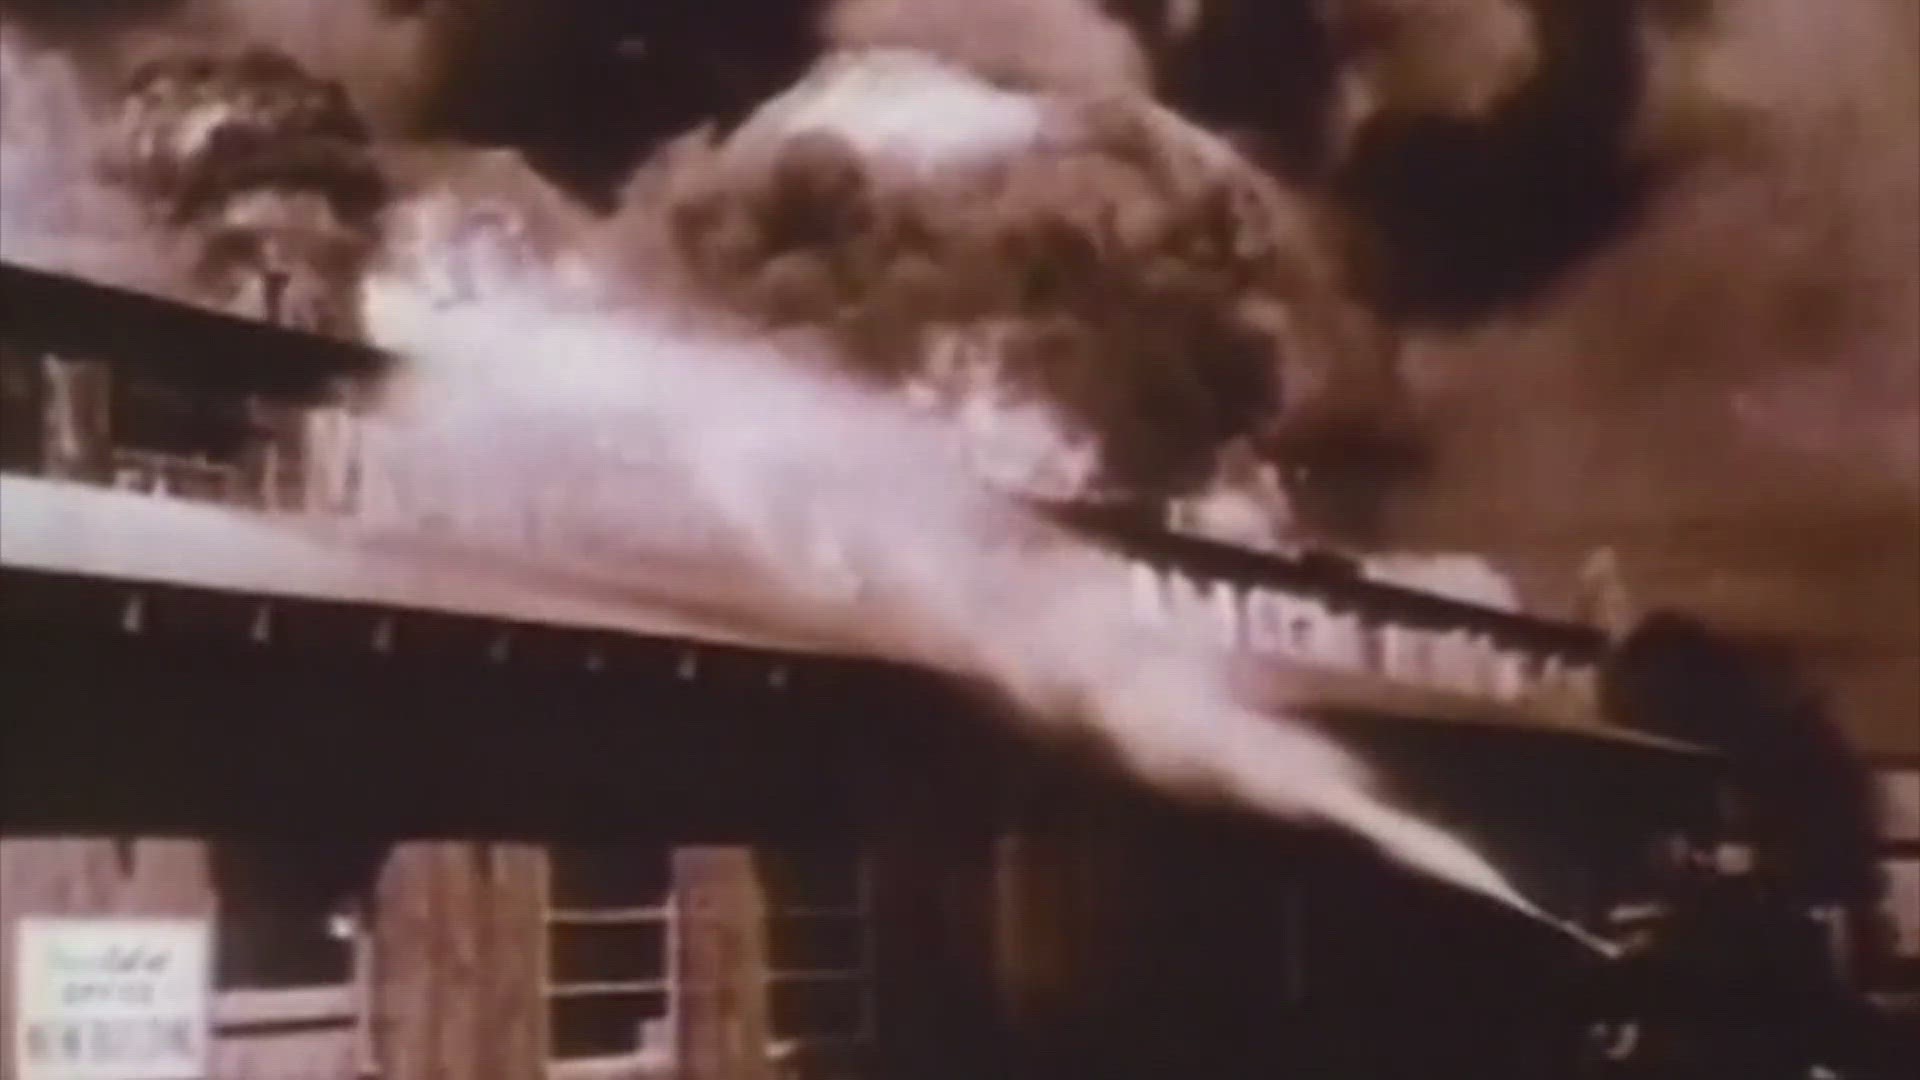 Nearly 600 people died that day. A ship carrying ammonium nitrate exploded at a loading dock.  It set up a chain reaction of explosions and fires.